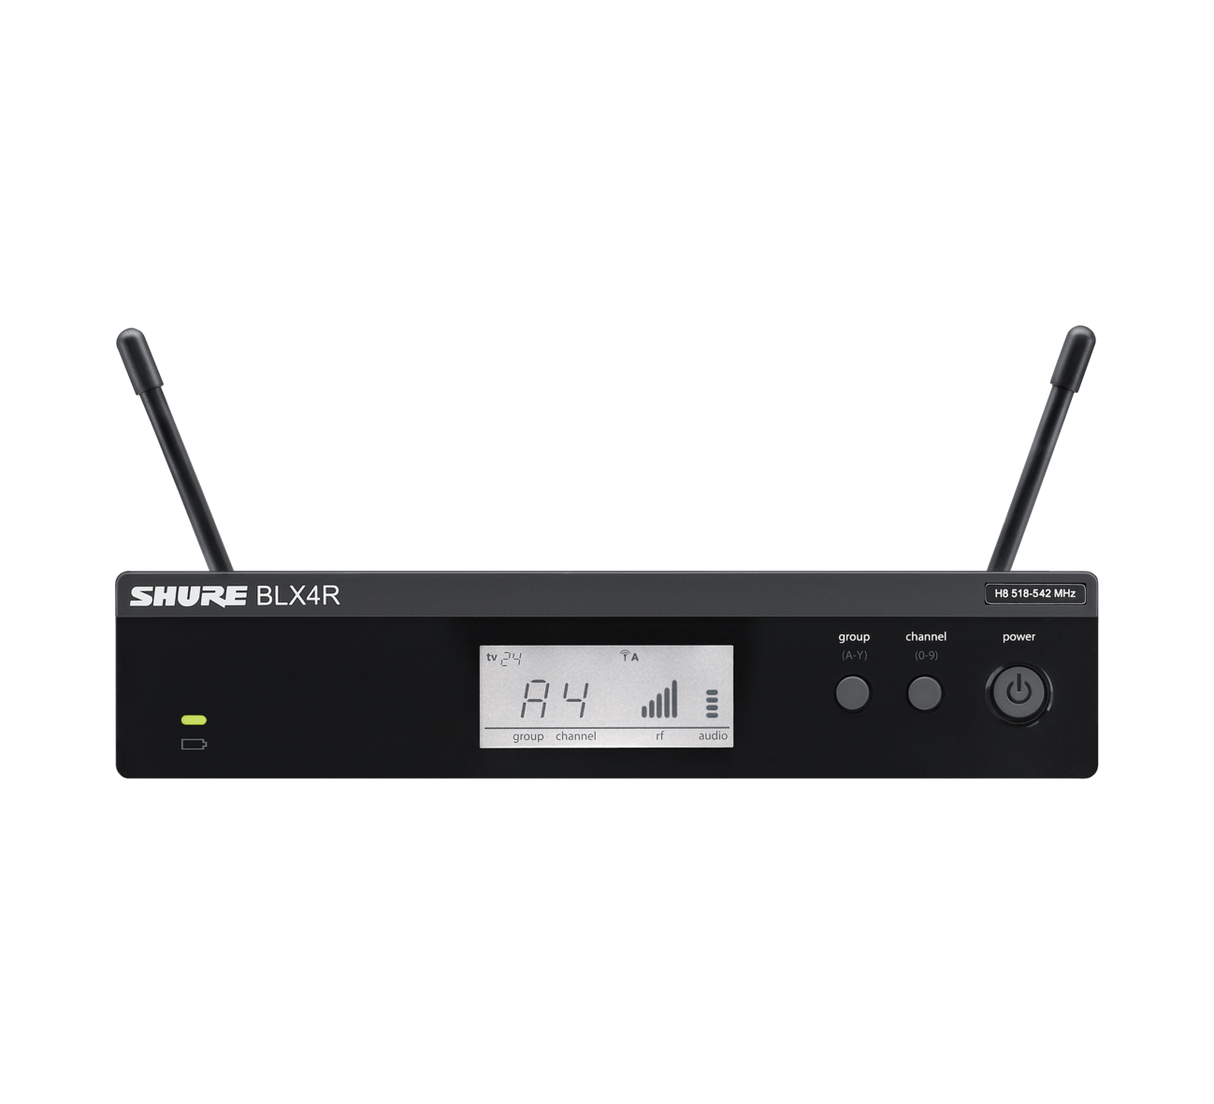 Shure BLX14RSM35H11 Wireless Rack-mount Headset System with SM35 Headset Microphone